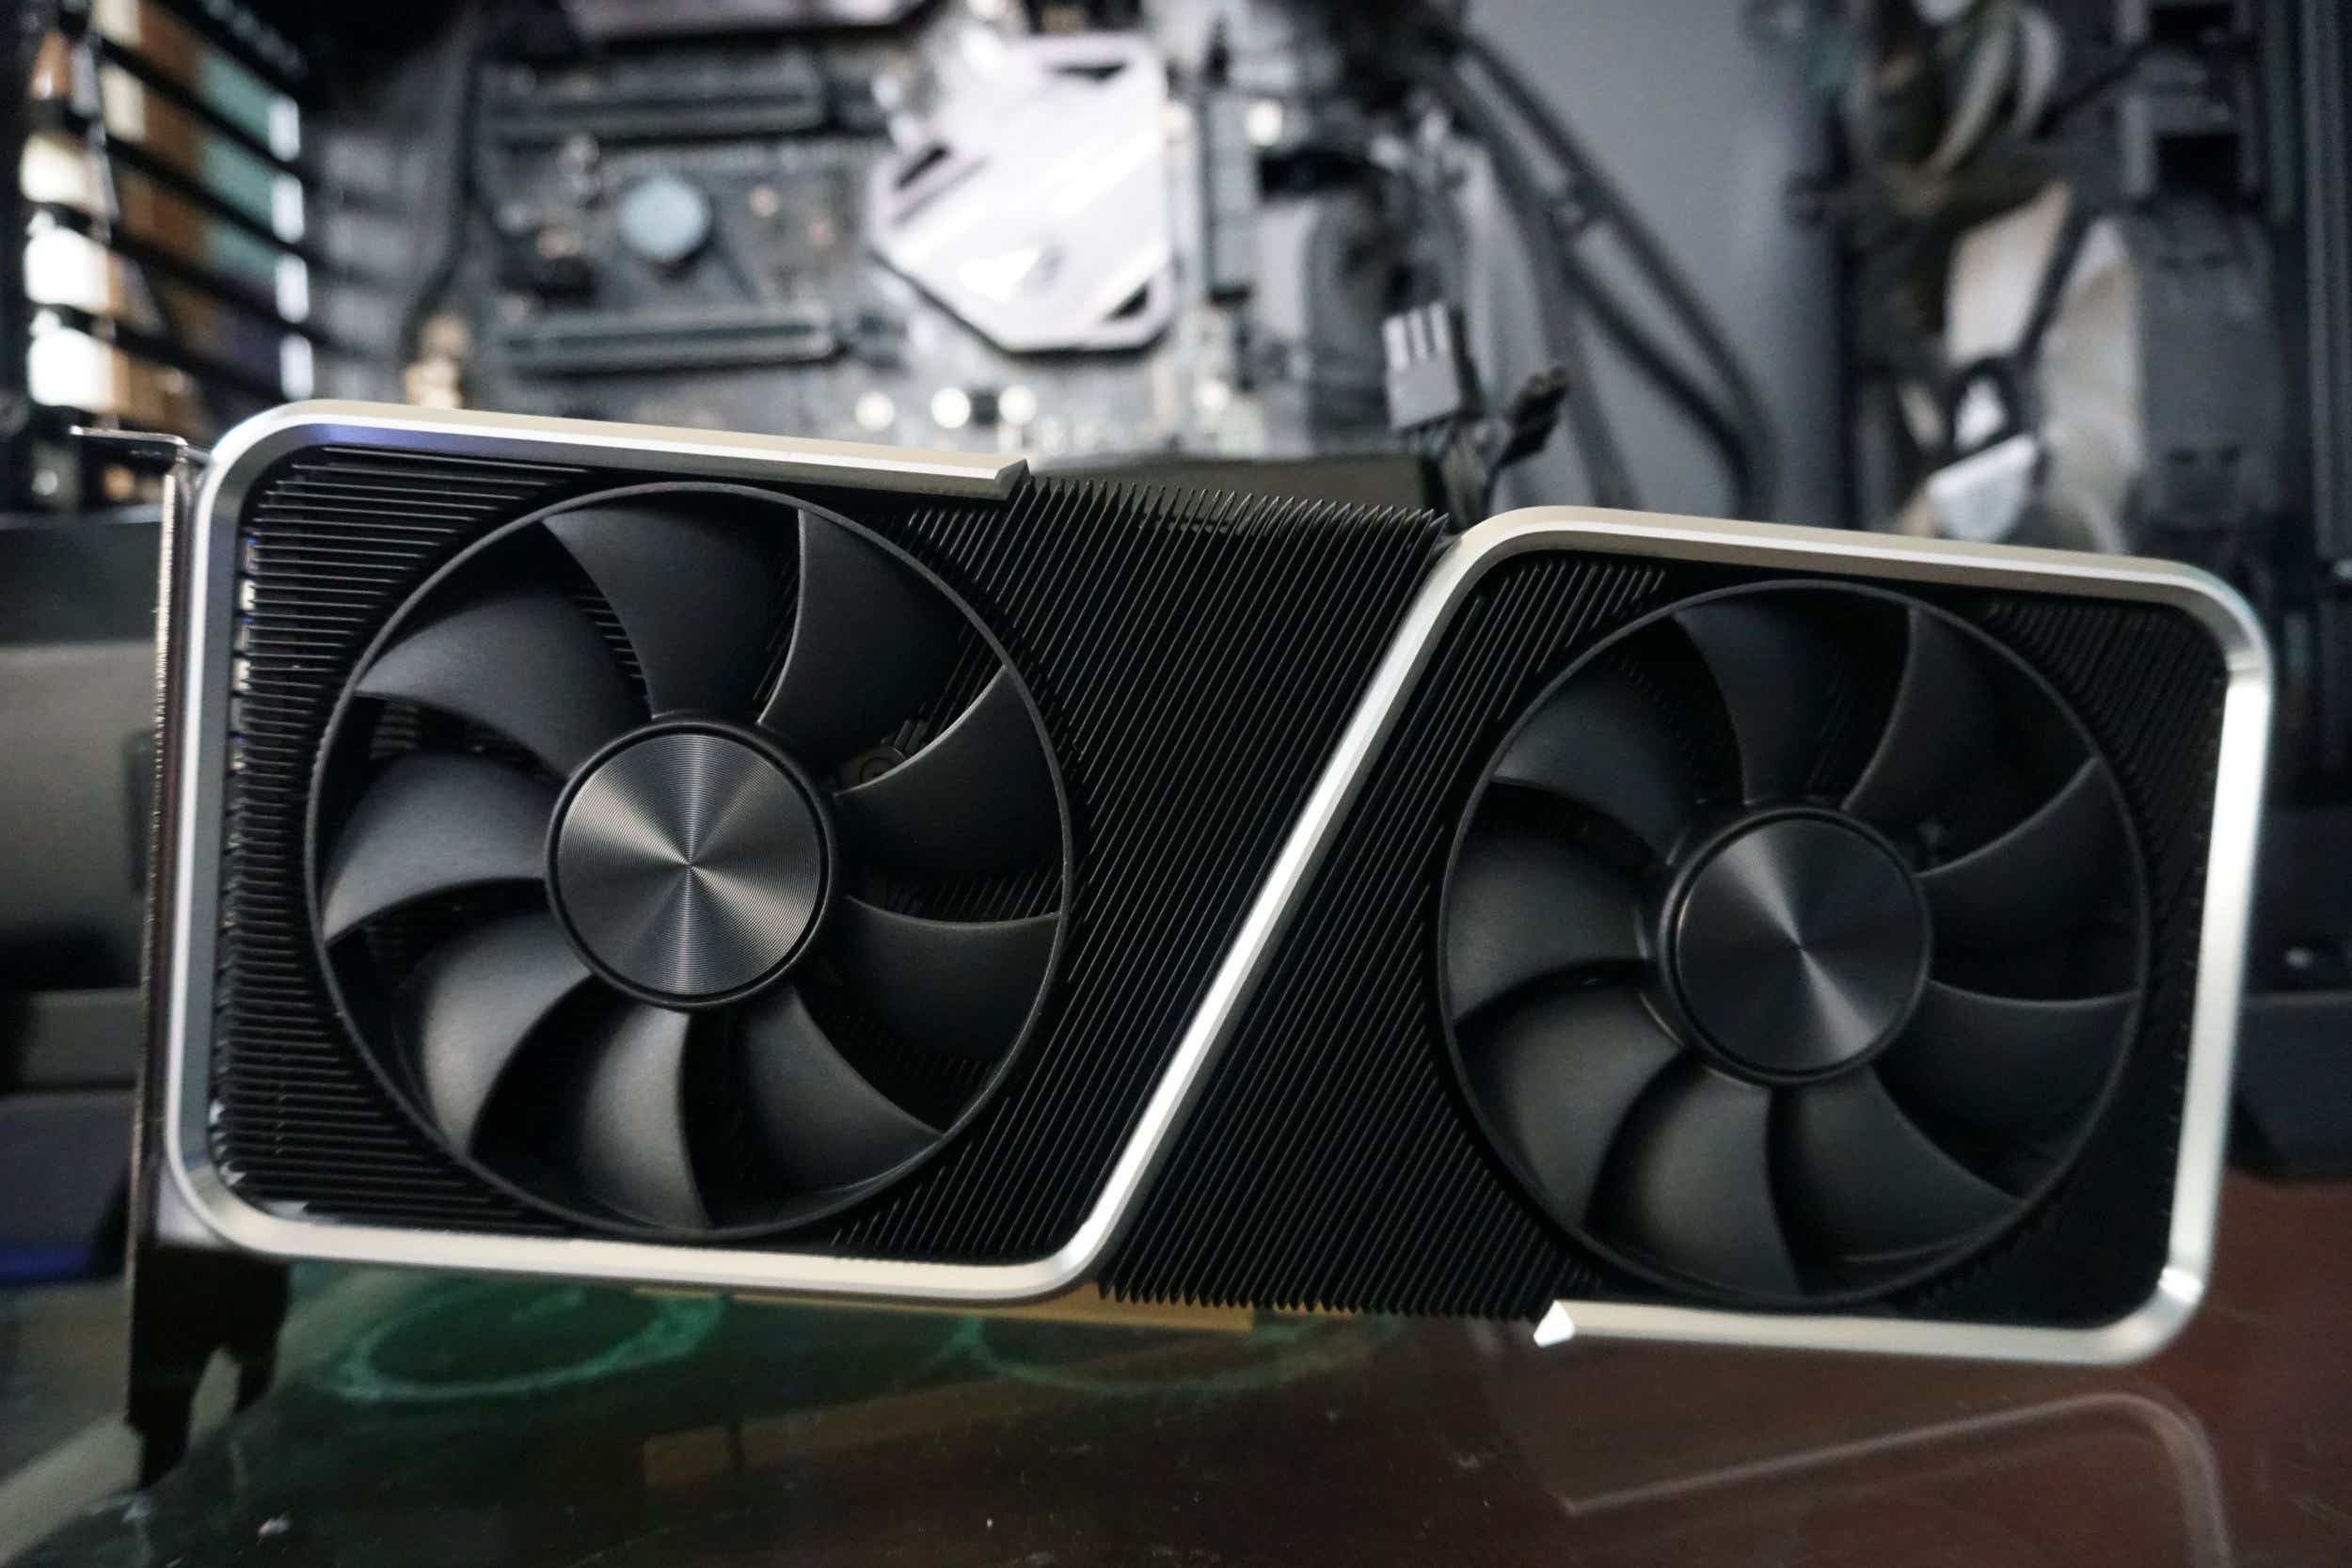 Nvidia GeForce RTX 3060 Ti - Best 1440p graphics card for ray tracing